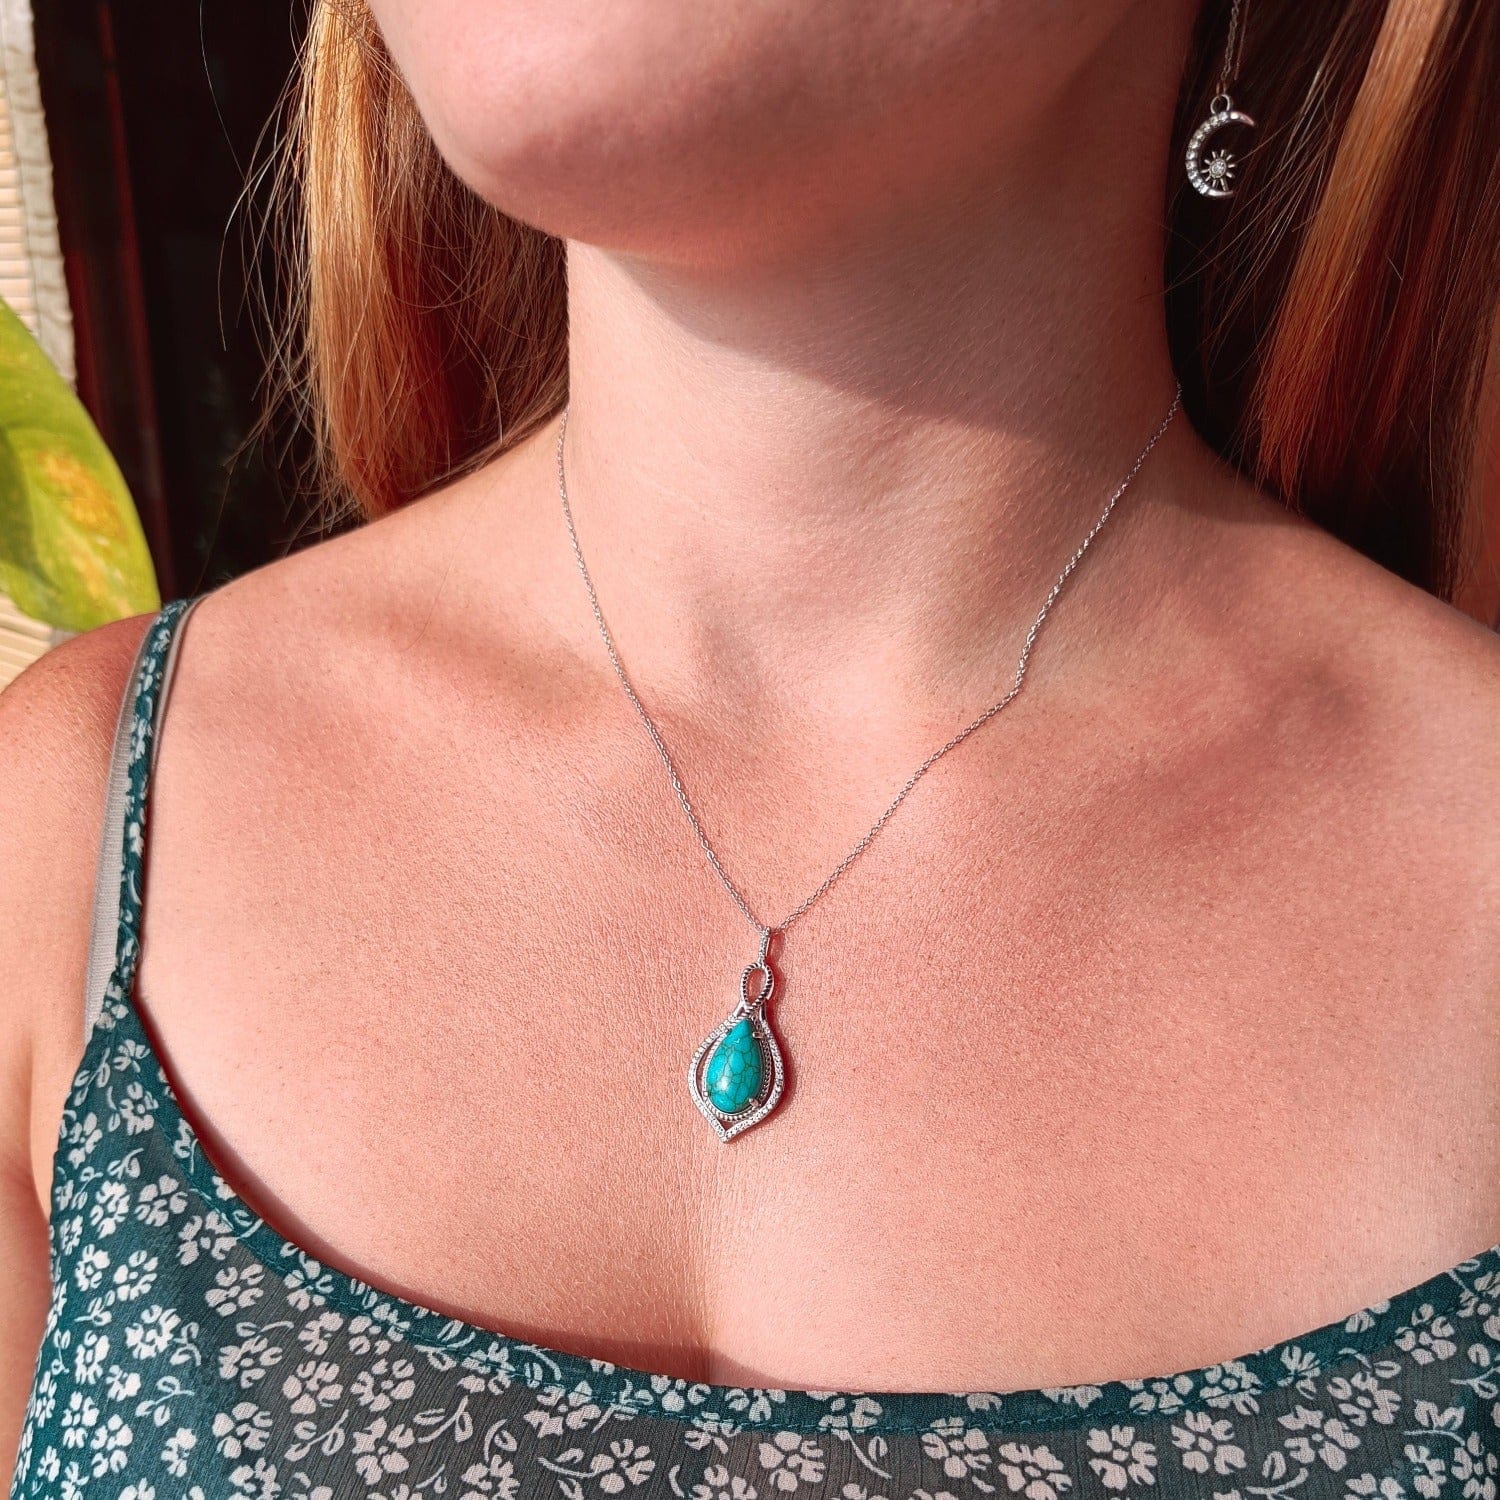 Mermaid's Turquoise Pendant Necklace featuring a turquoise stone set in S925 sterling silver on a model middle zoomed in natural sunlight